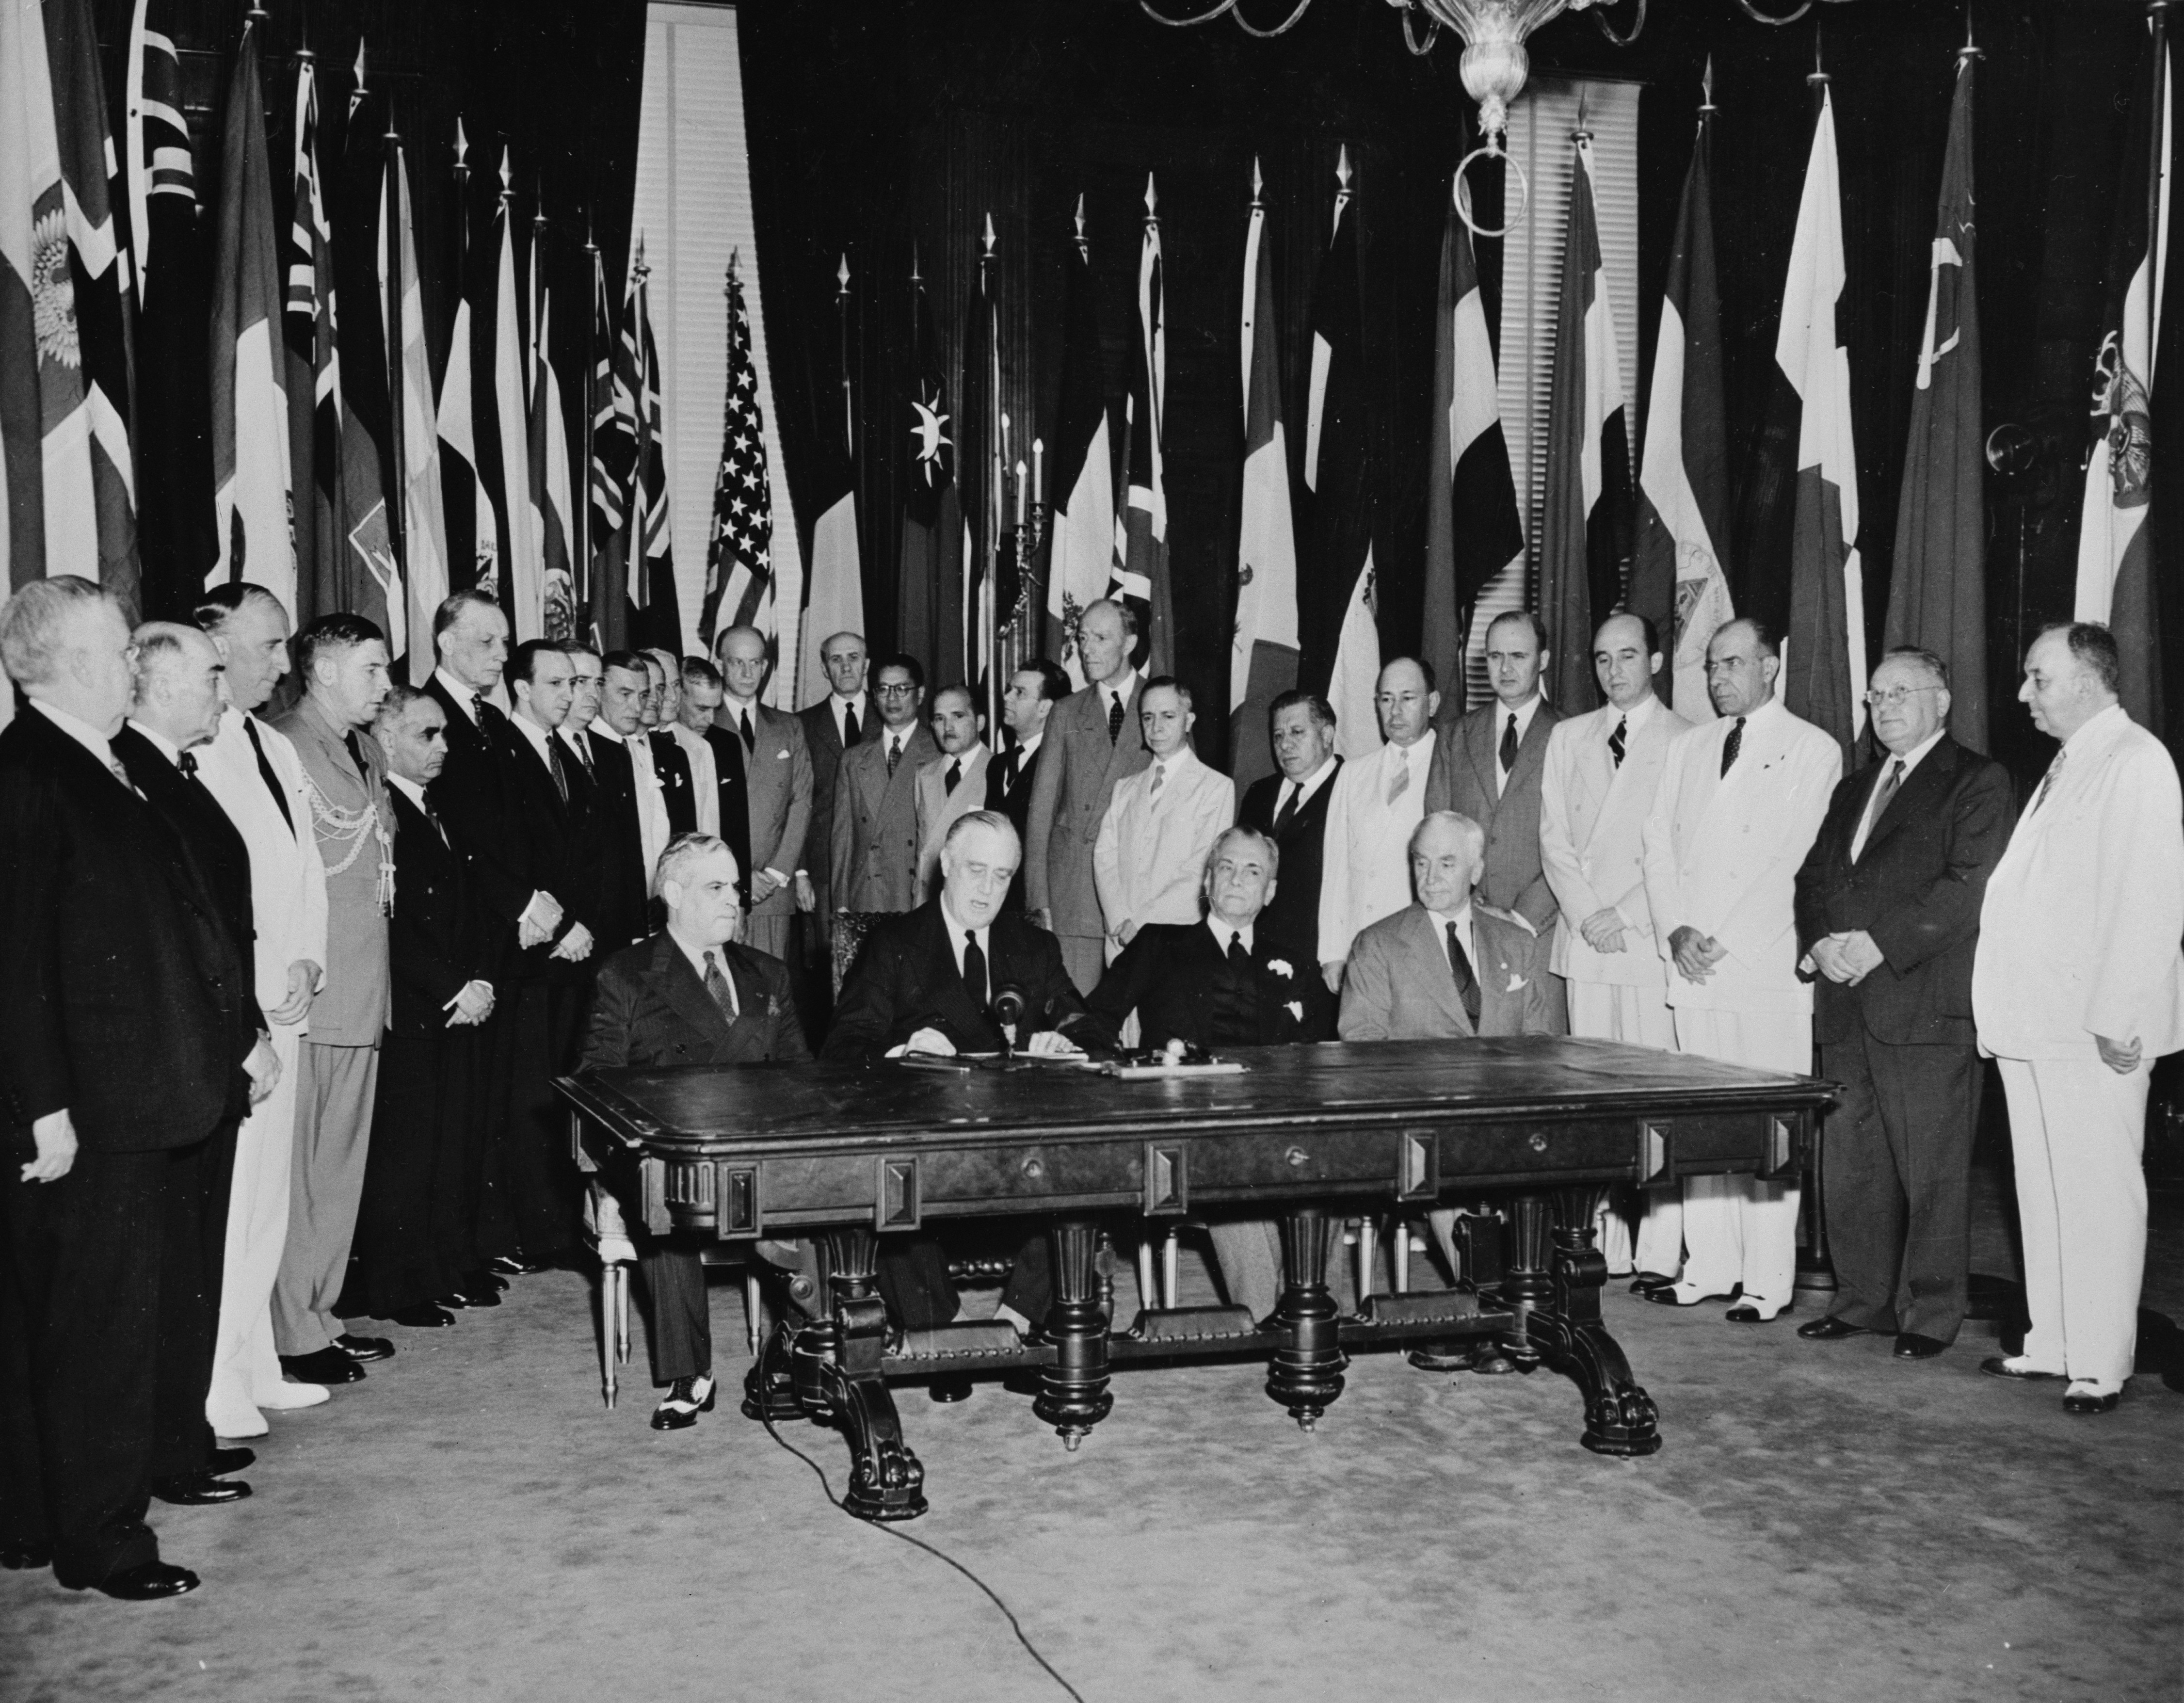 Francisco Castillo Najera, Franklin Roosevelt, Manuel Quezon, Cordell Hull, and other Allied leaders at the White House, Washington DC, United States, Jul 1942